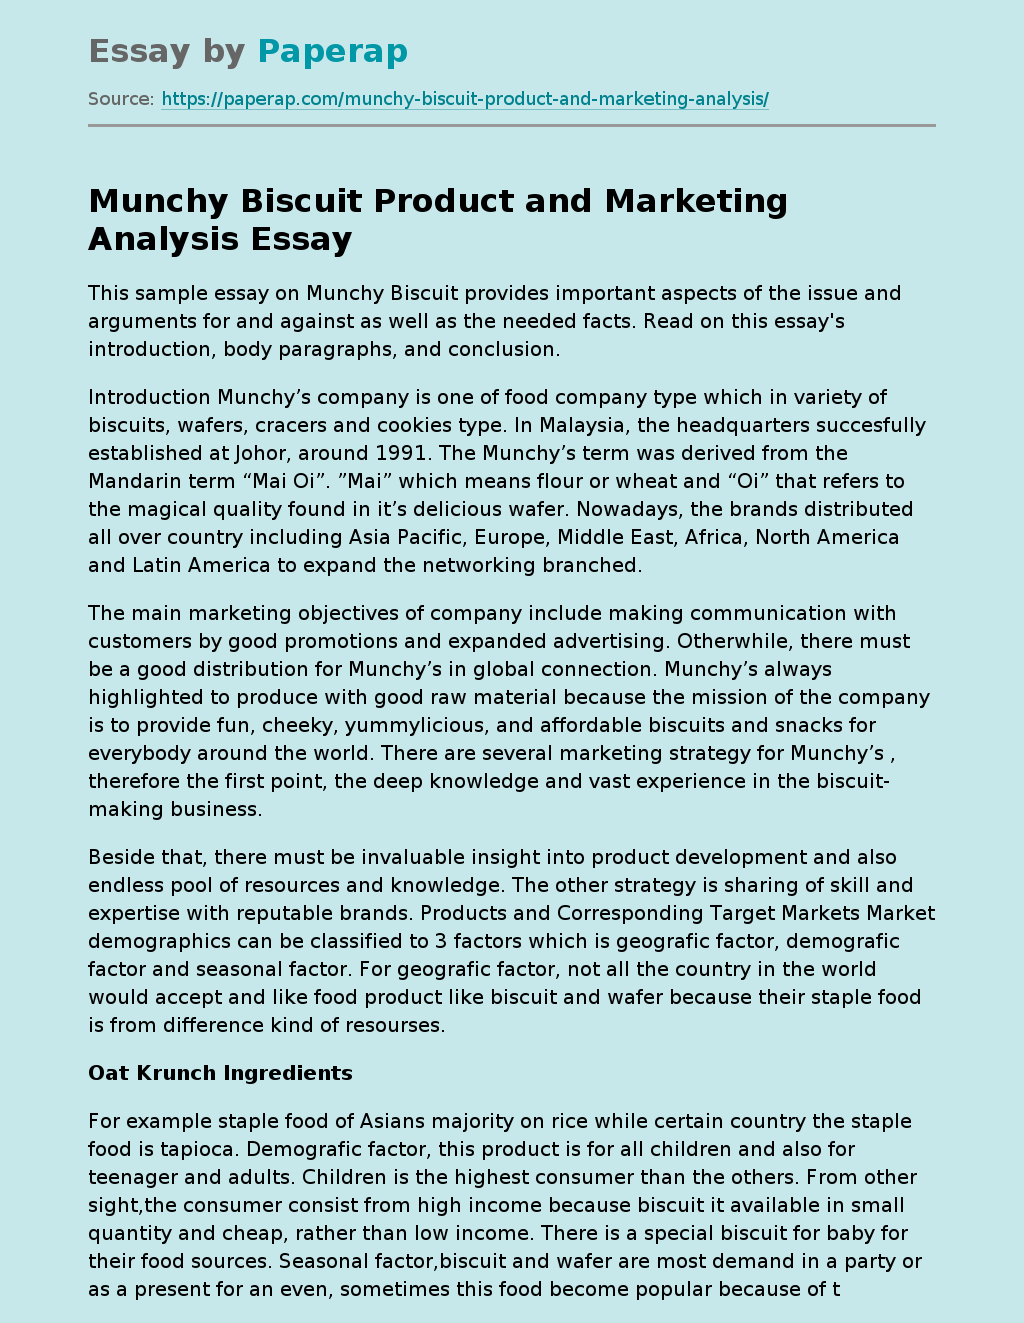 Munchy Biscuit Product and Marketing Analysis